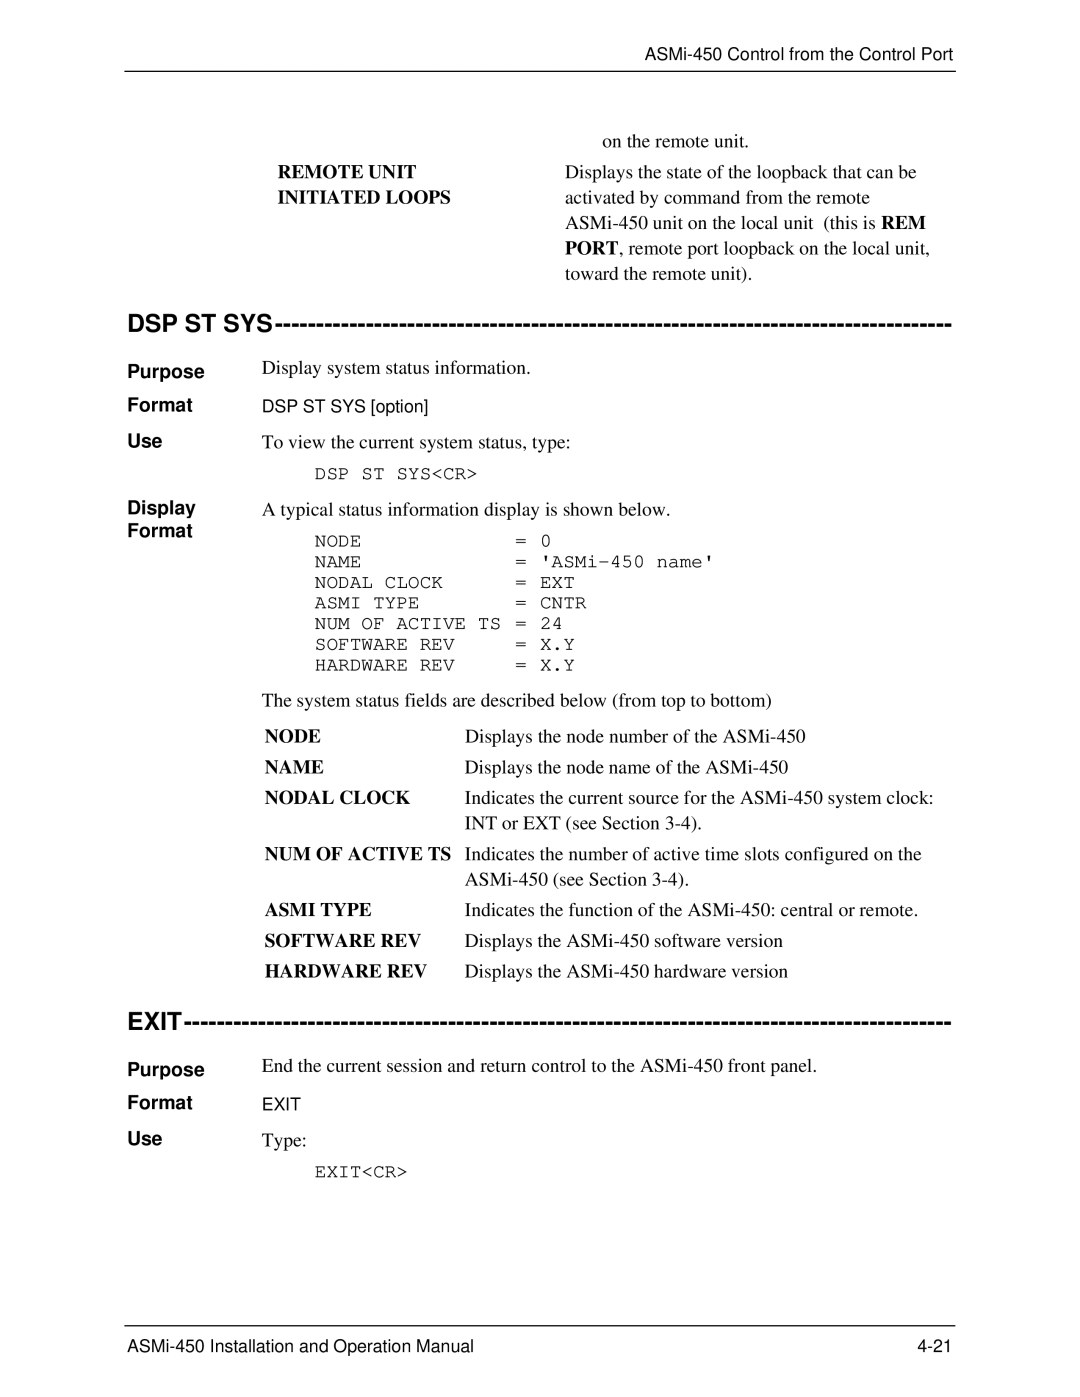 RAD Data comm ASMI-450 operation manual Dsp St Sys, Exit, Purpose Format Use Display Format 